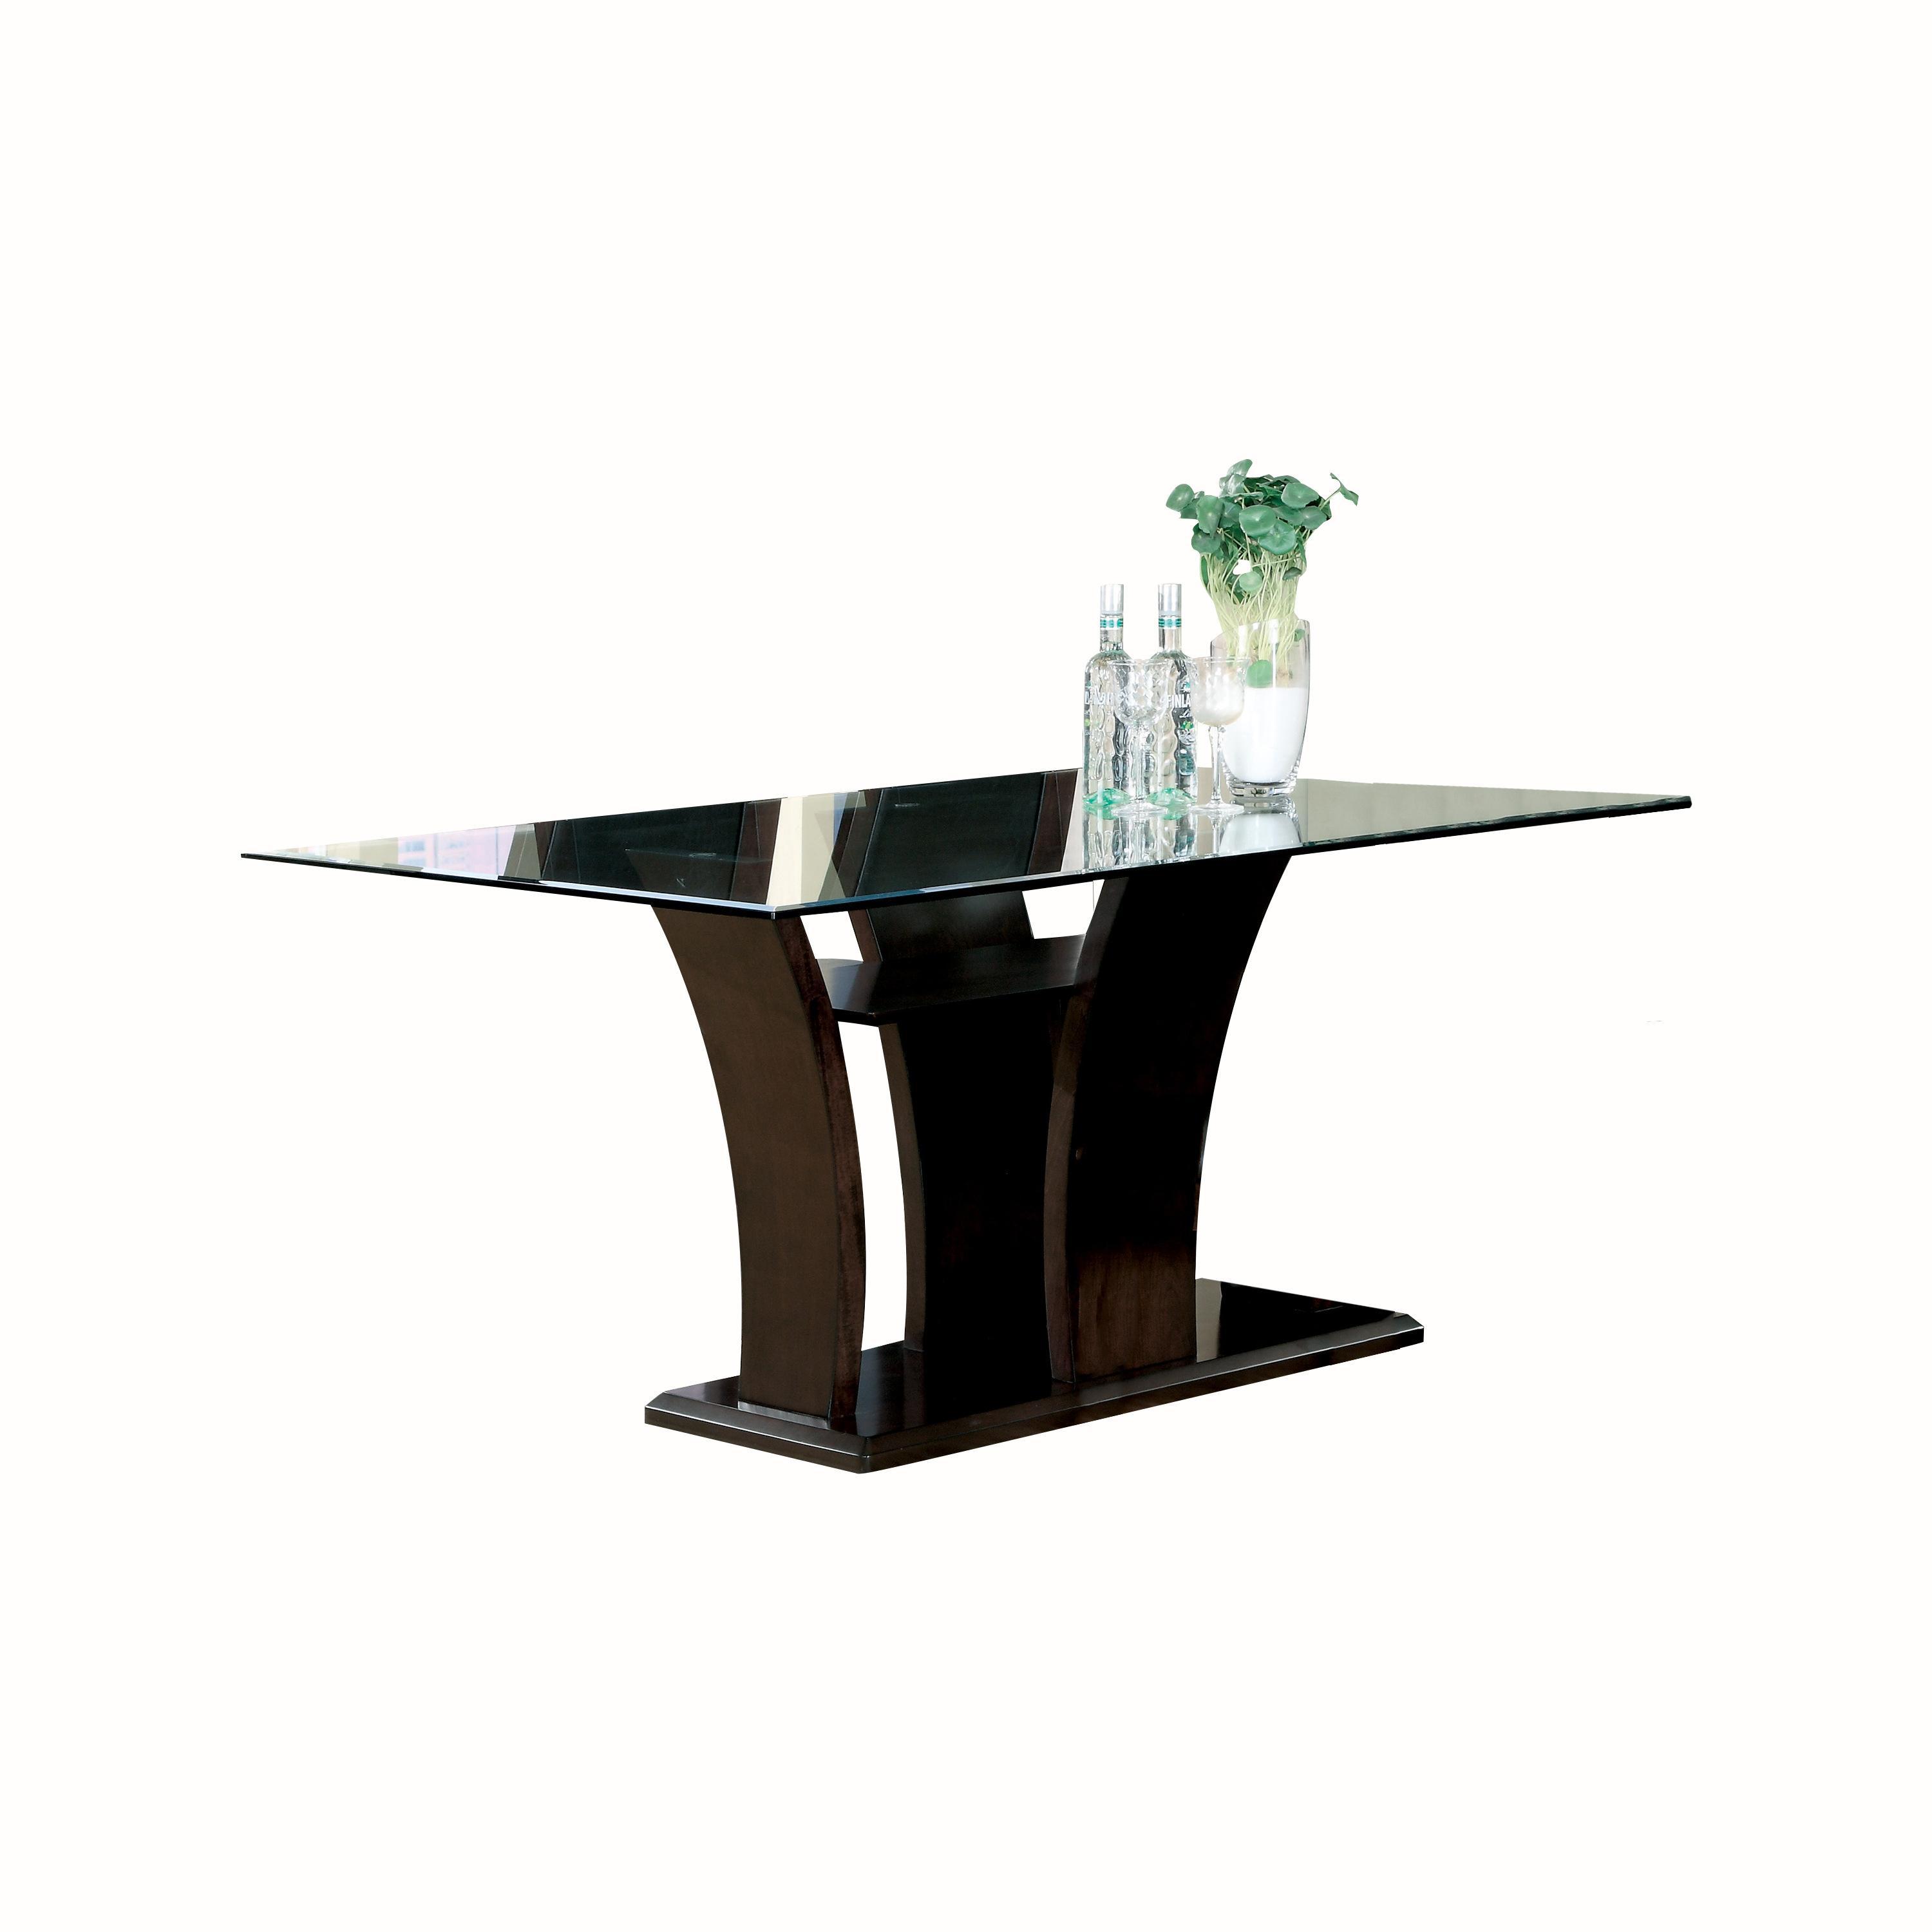 

    
Contemporary Espresso Tempered Glass Dining Table Homelegance 710-72* Daisy
